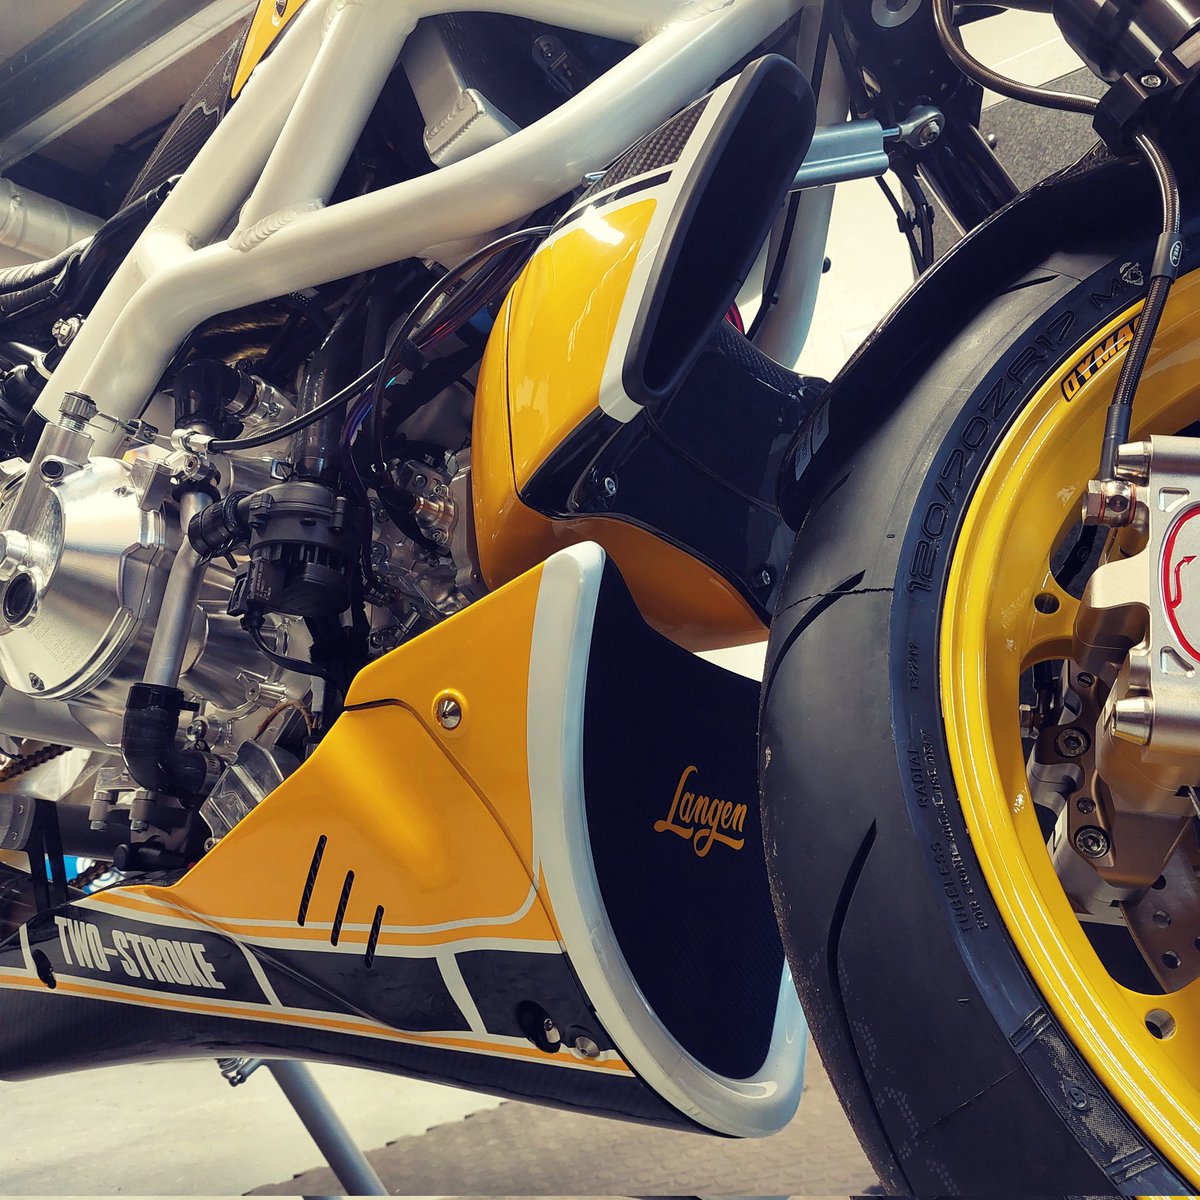 One for the classic 2 Stroke racing fans. 
Another exquisite customer build.

#custompaint #kennyroberts  #twostrokelife #2strokes #custommotorcycles #langen